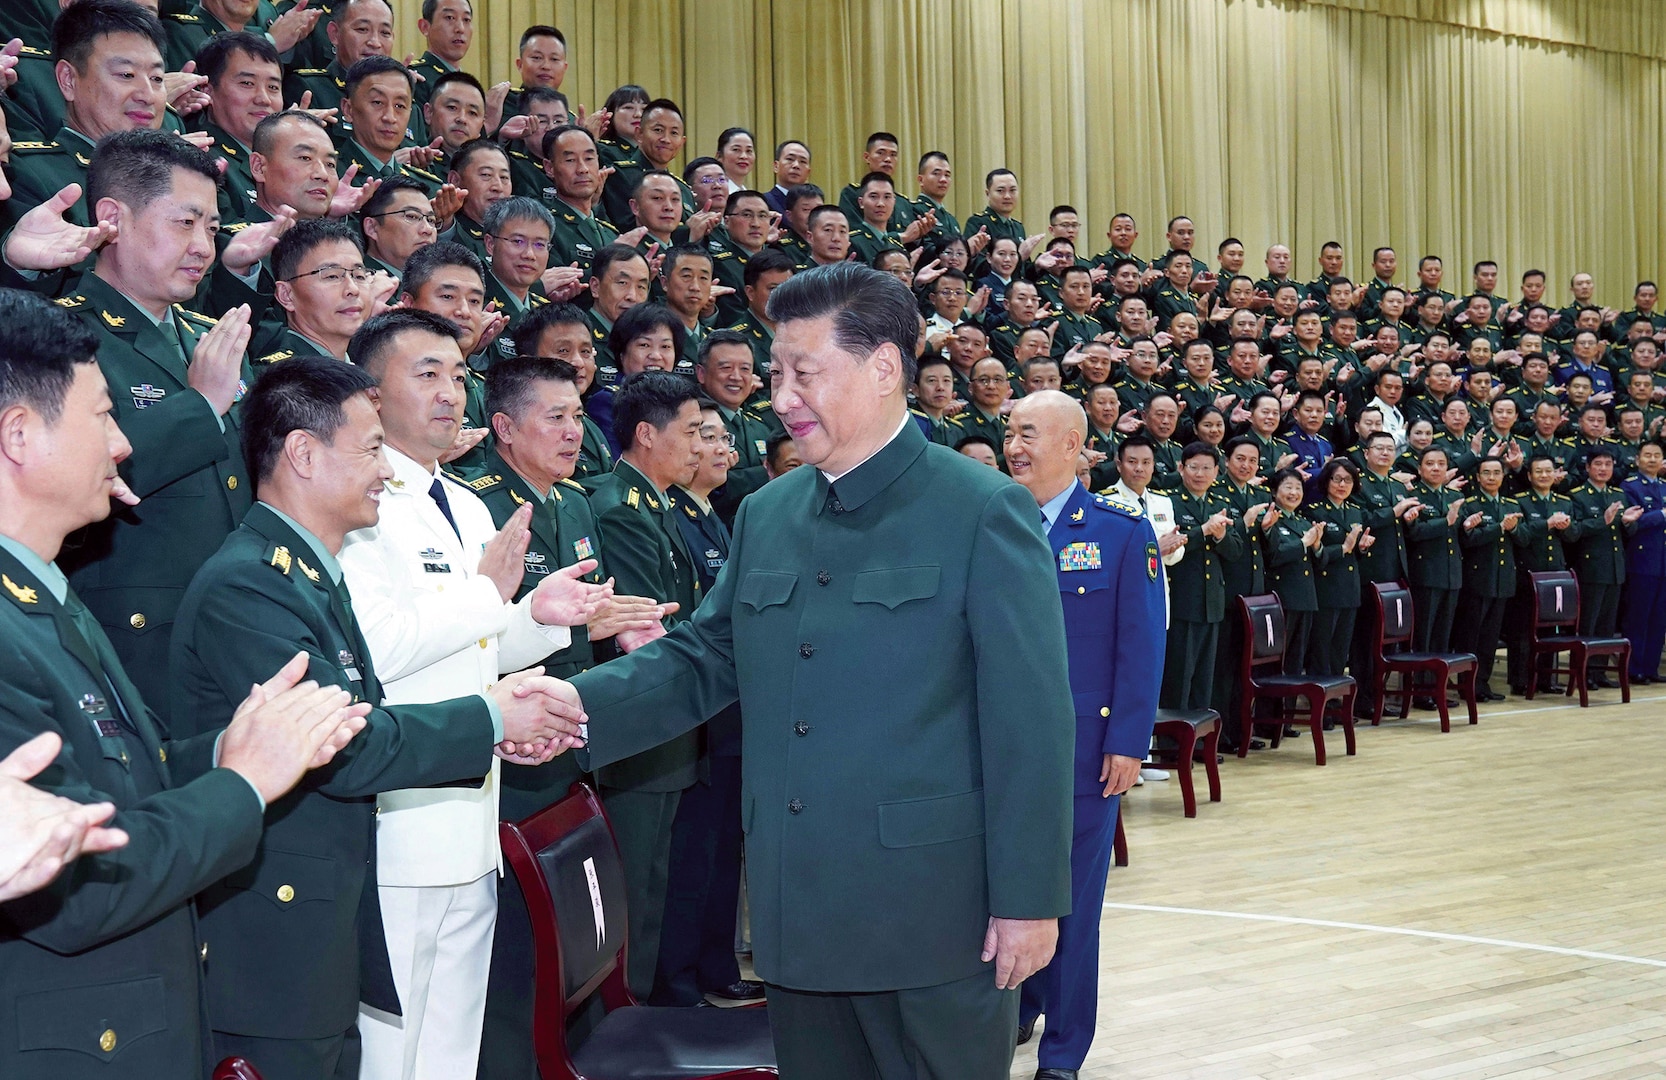 Chinese President Xi Jinping meets with delegates to First Party Congress of People’s Liberation Army Joint Logistic Support Force in Wuhan, Hubei Province, October 18, 2019